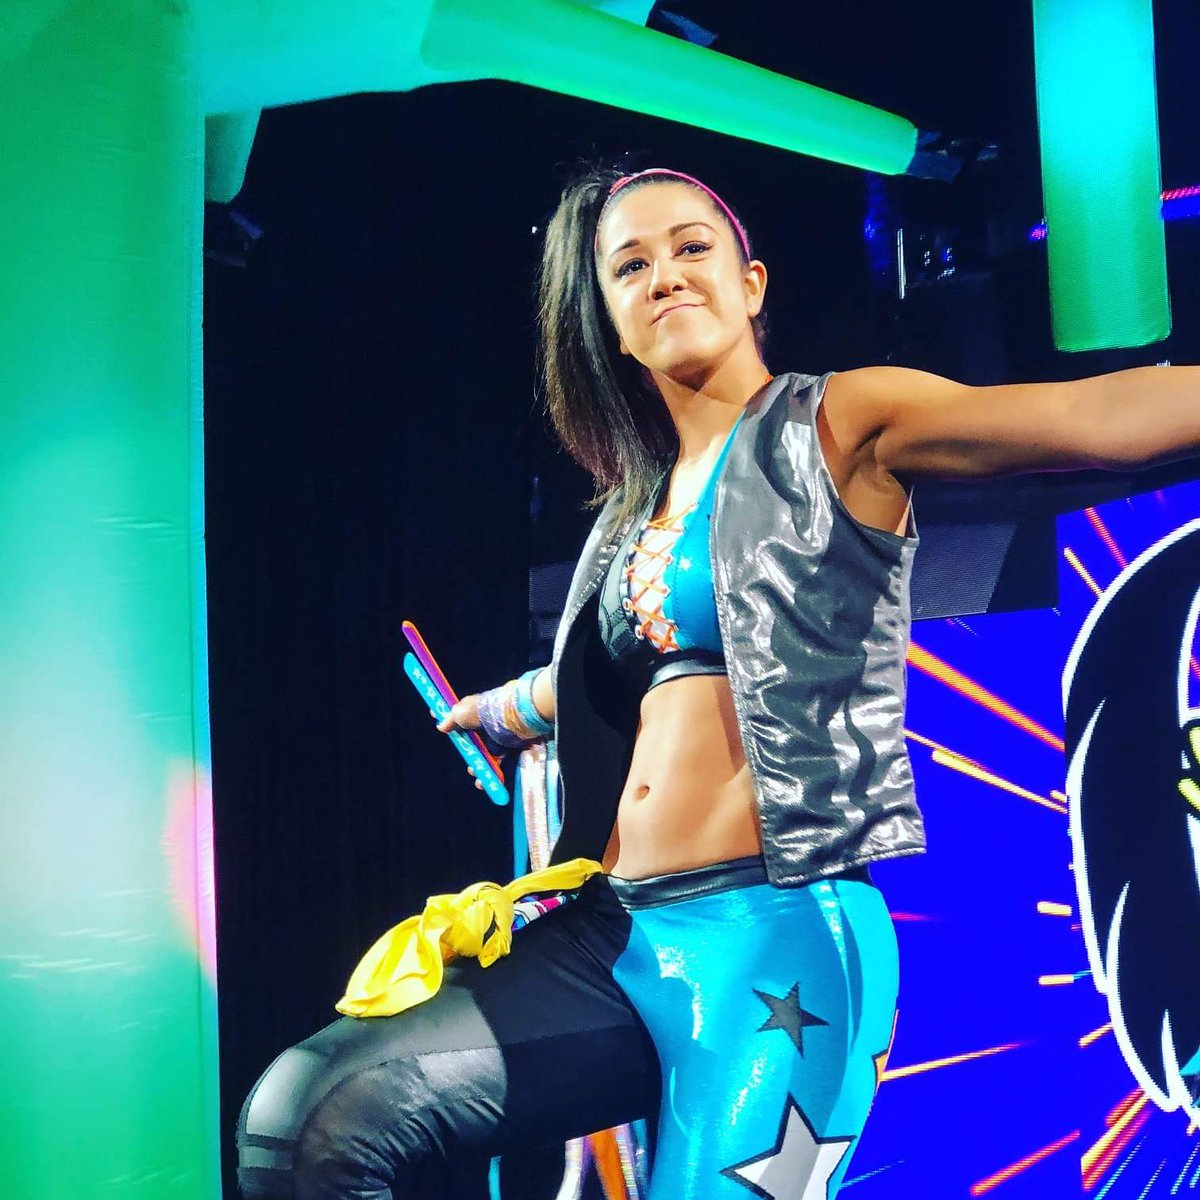 bayley awesome pic (2)